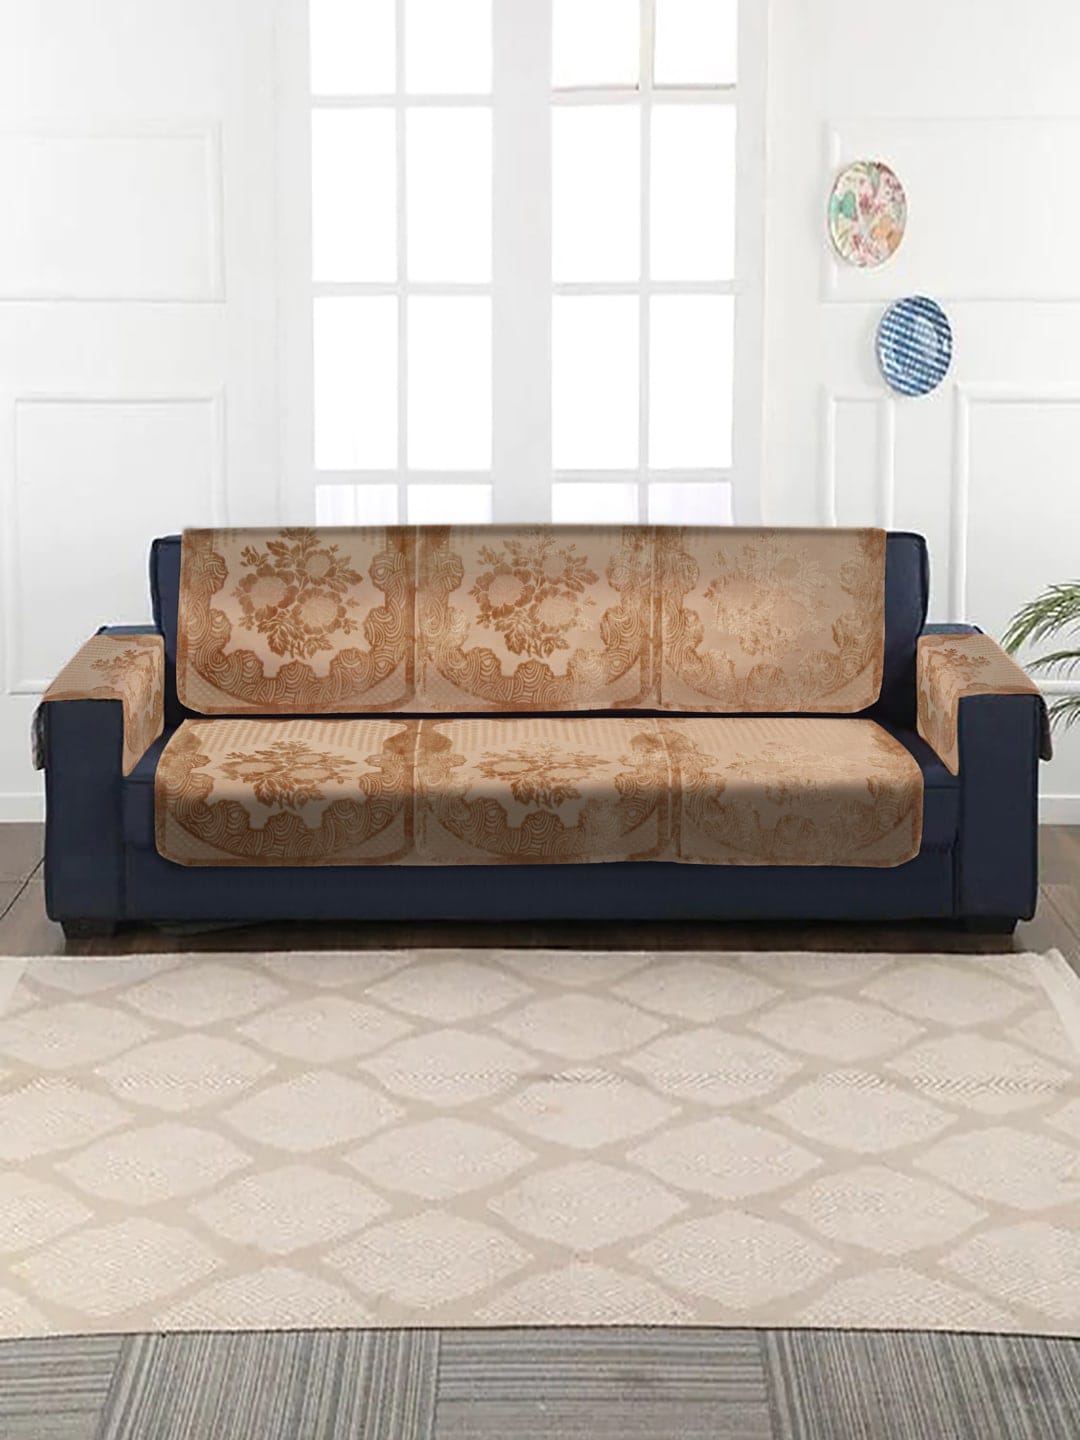 HOSTA HOMES Beige Floral Embossed 5 Seater Sofa Cover Price in India